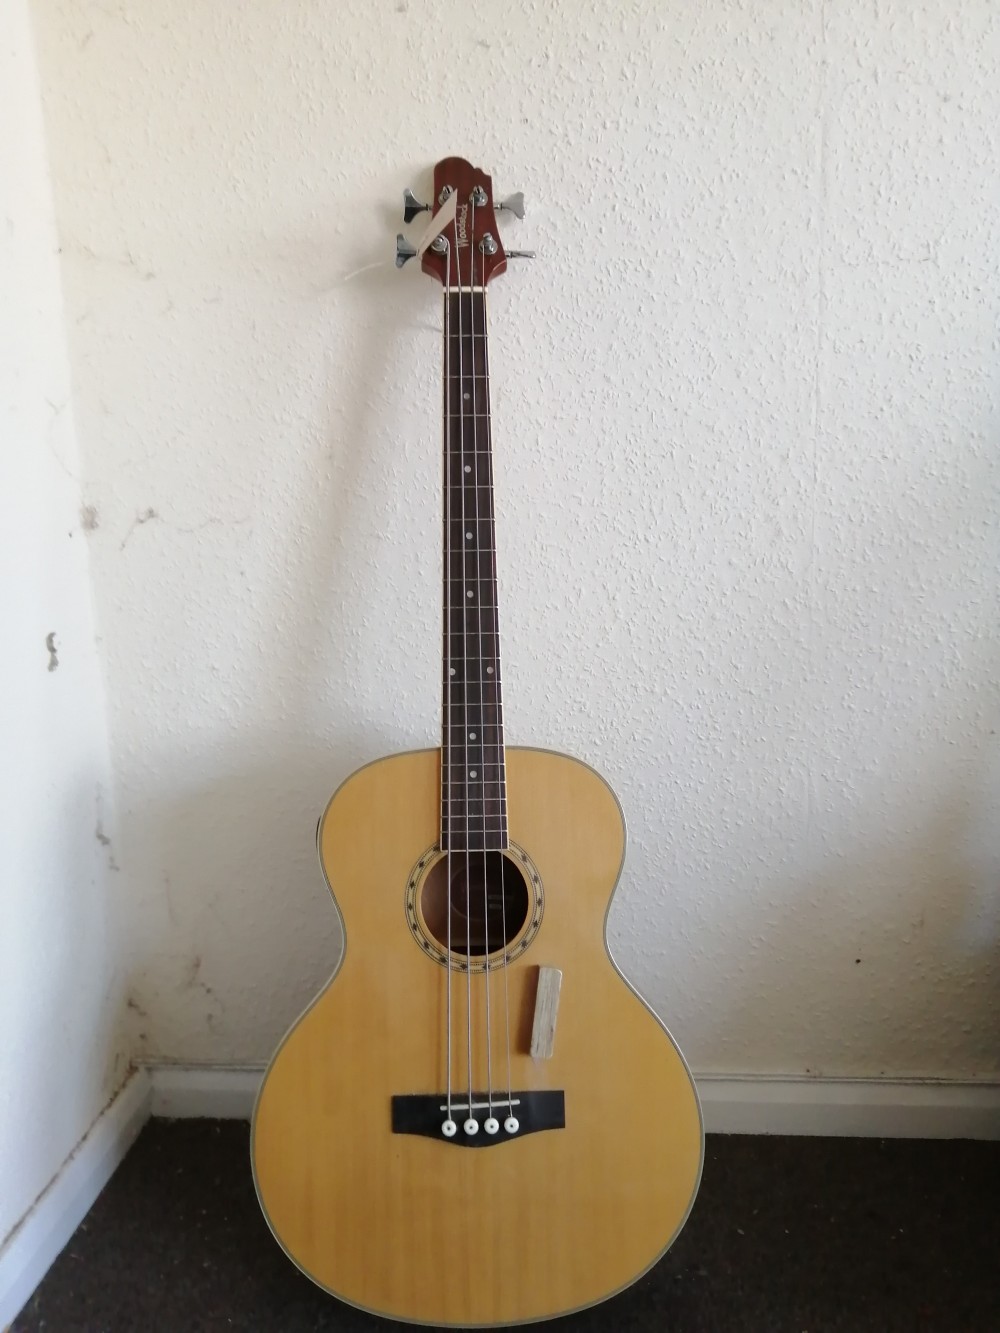 A Woodstock electro acoustic bass guitar